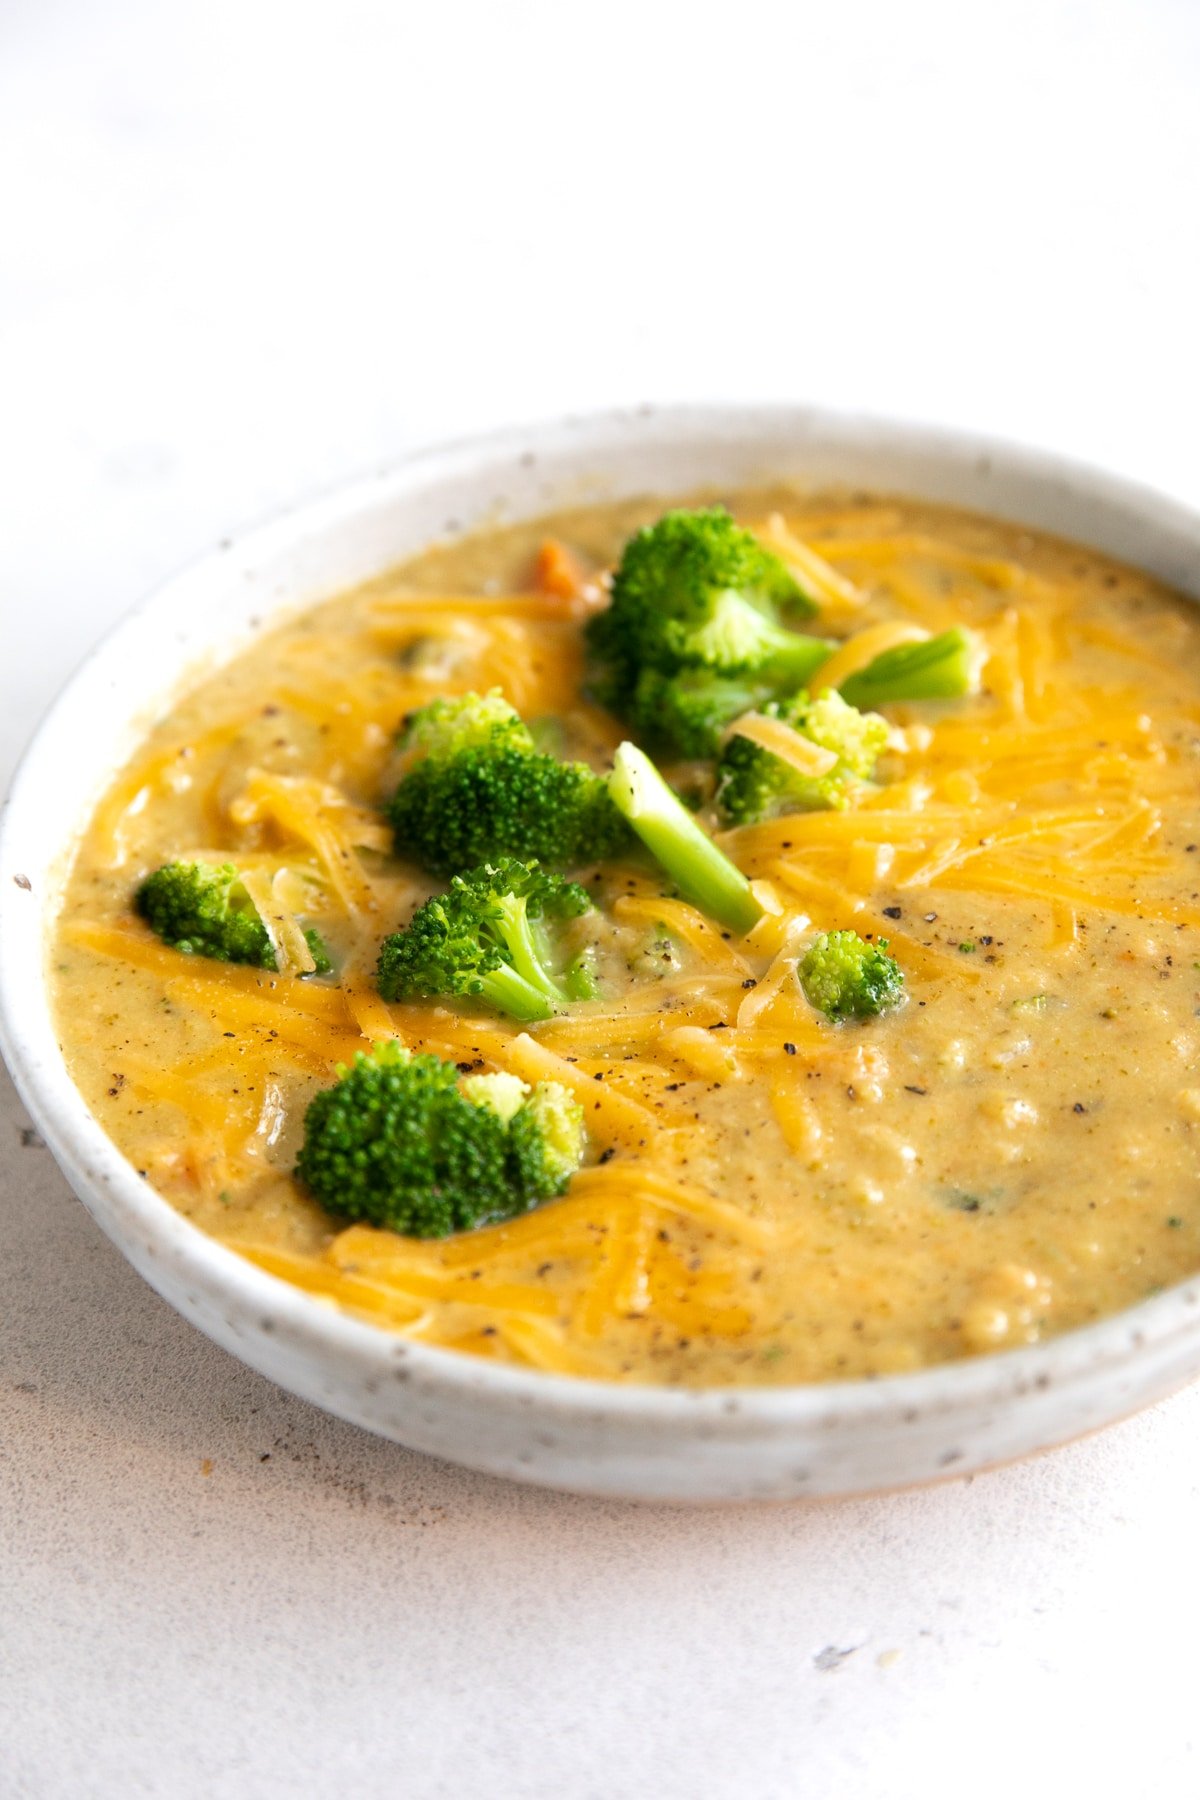 White shallow bowl filled with broccoli cheddar soup topped with blanched broccoli florets.